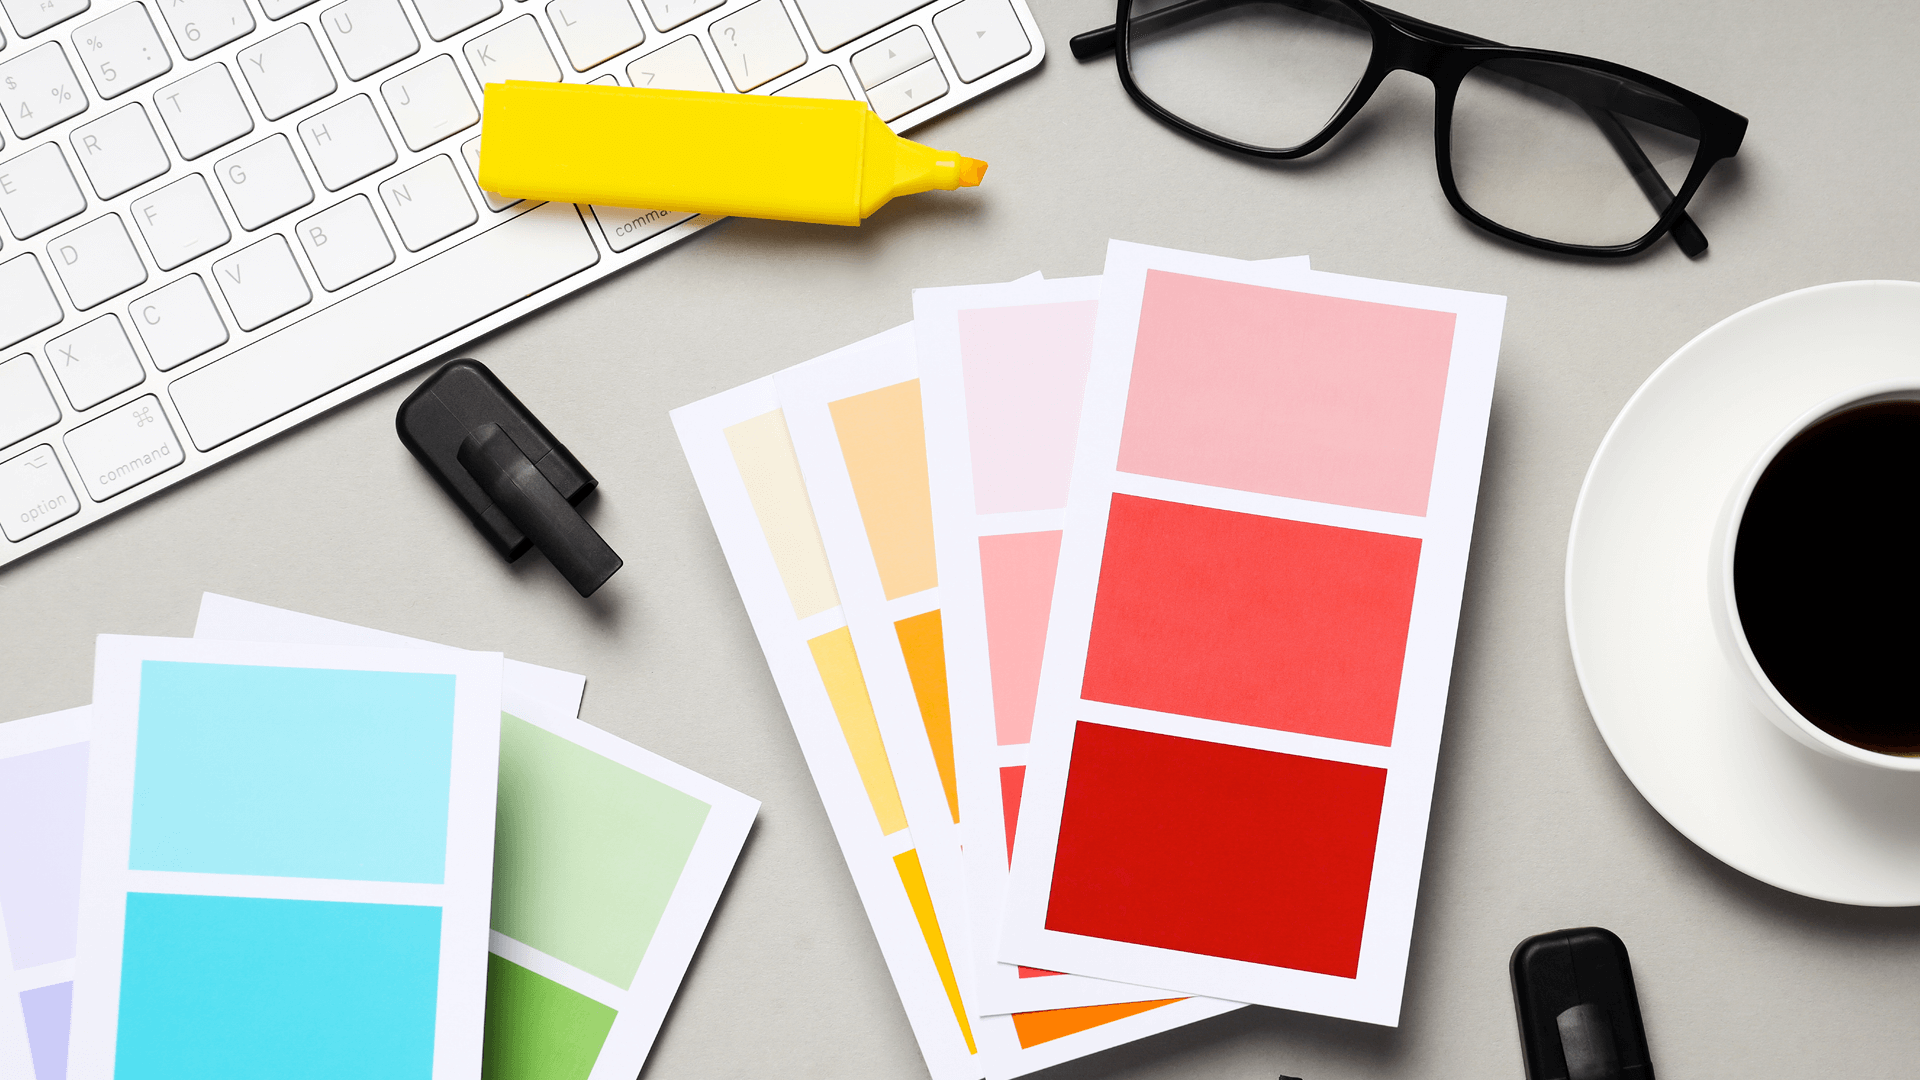 LEARN: CMYK: The Recipe for Quality Color